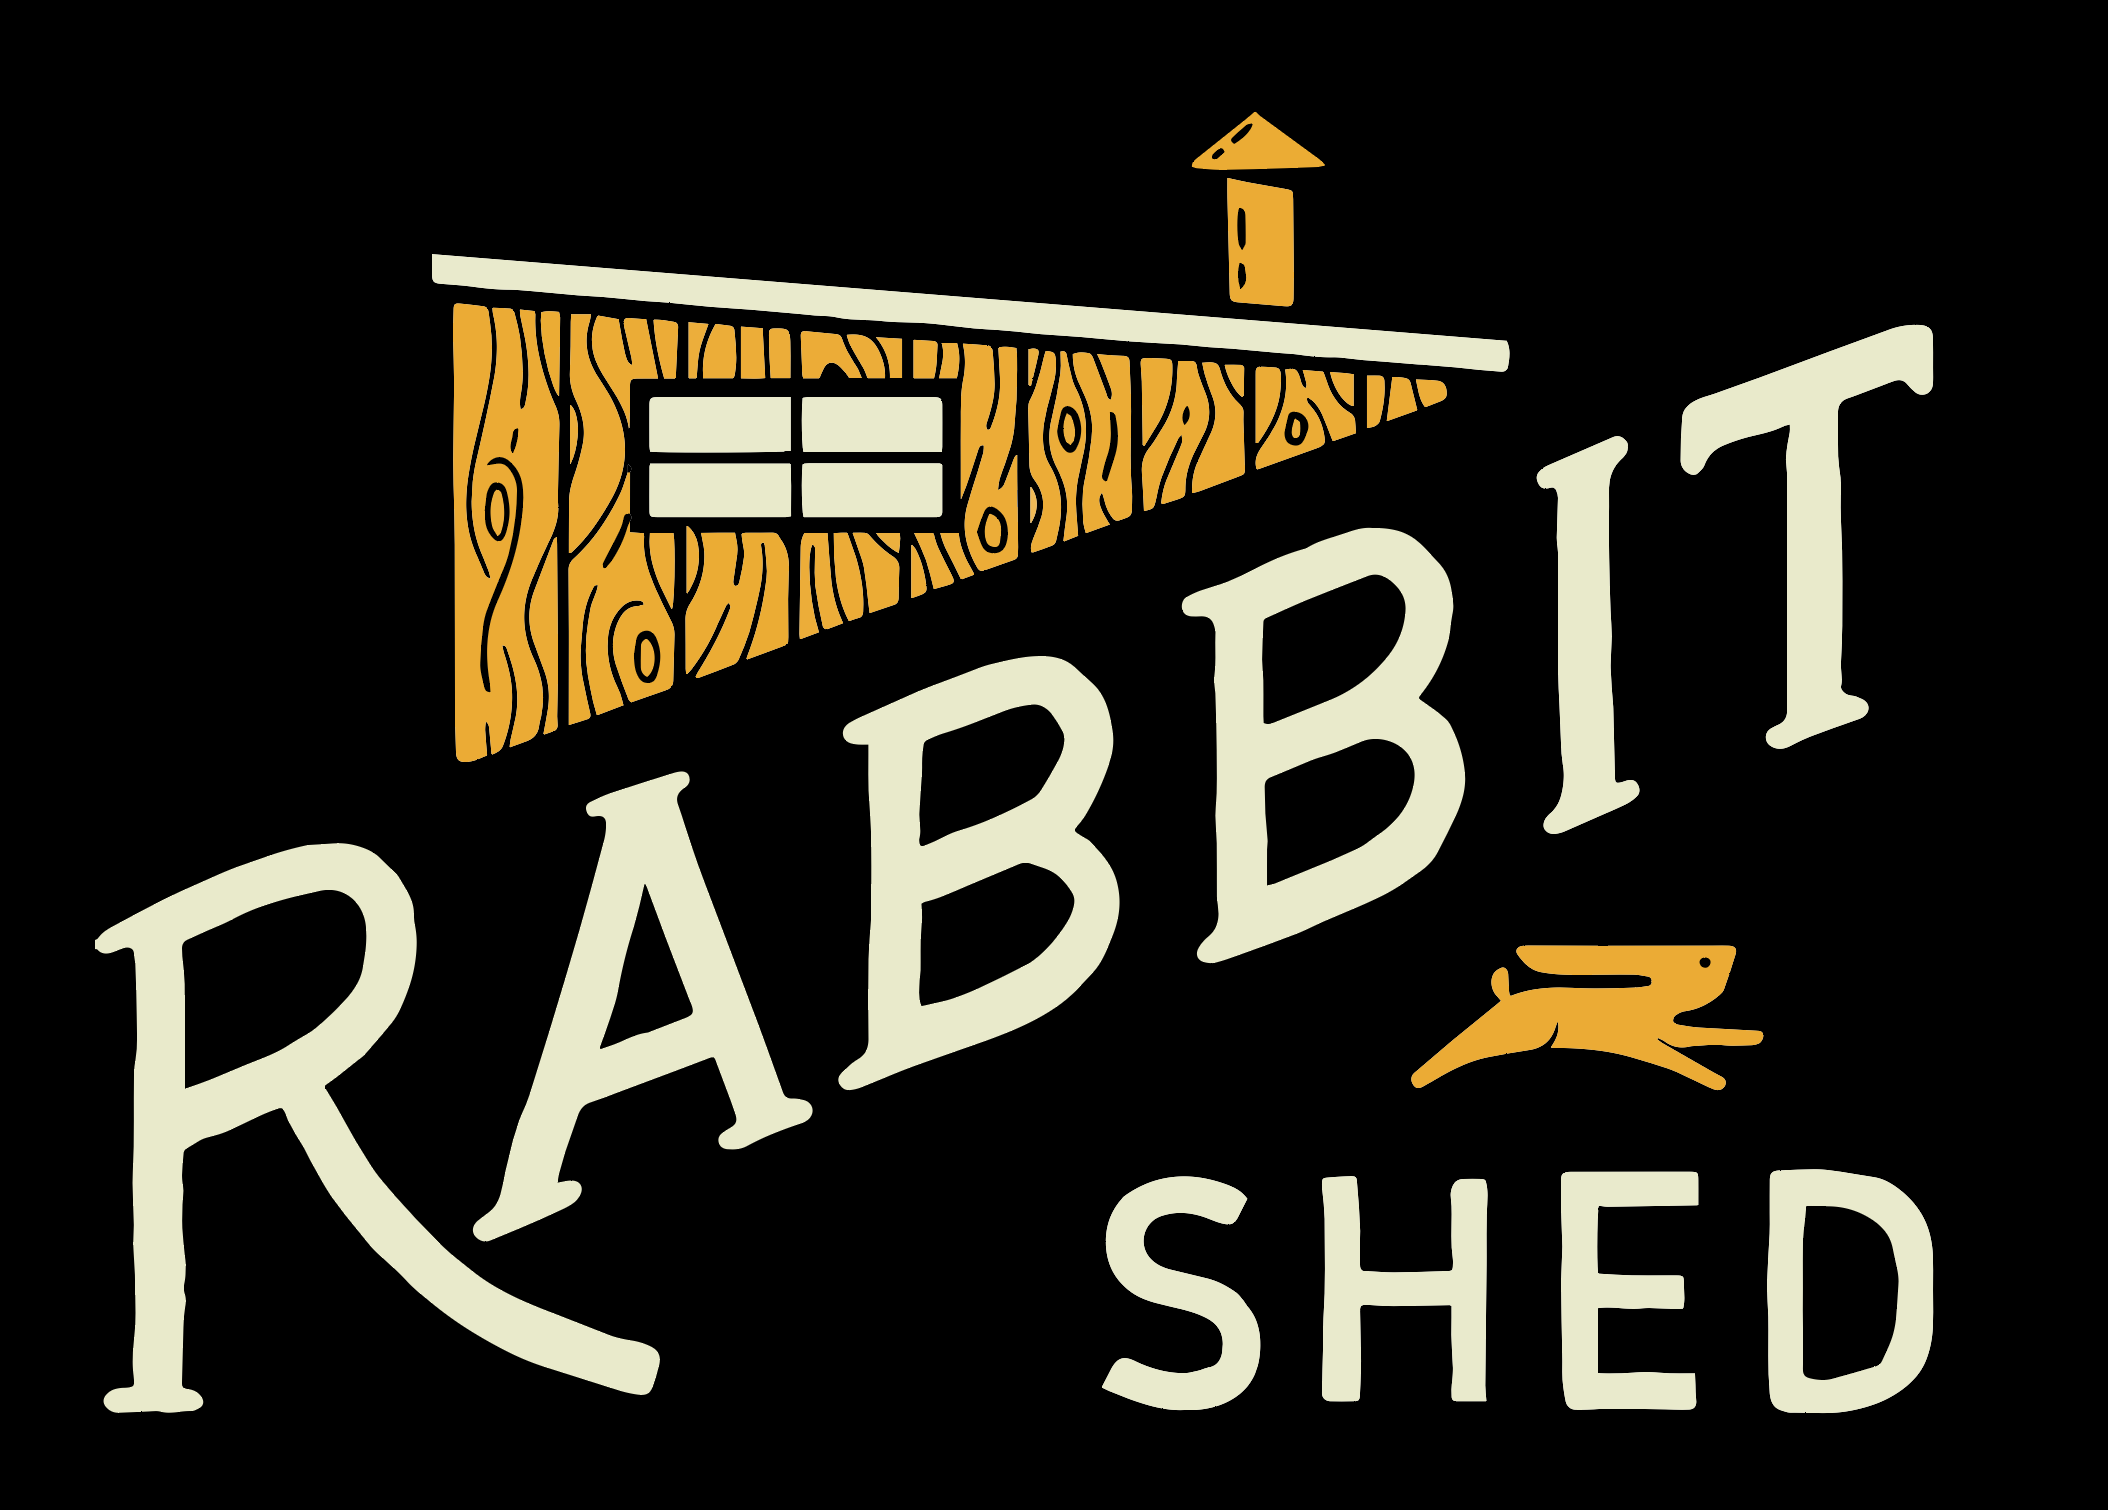 Rabbit Shed